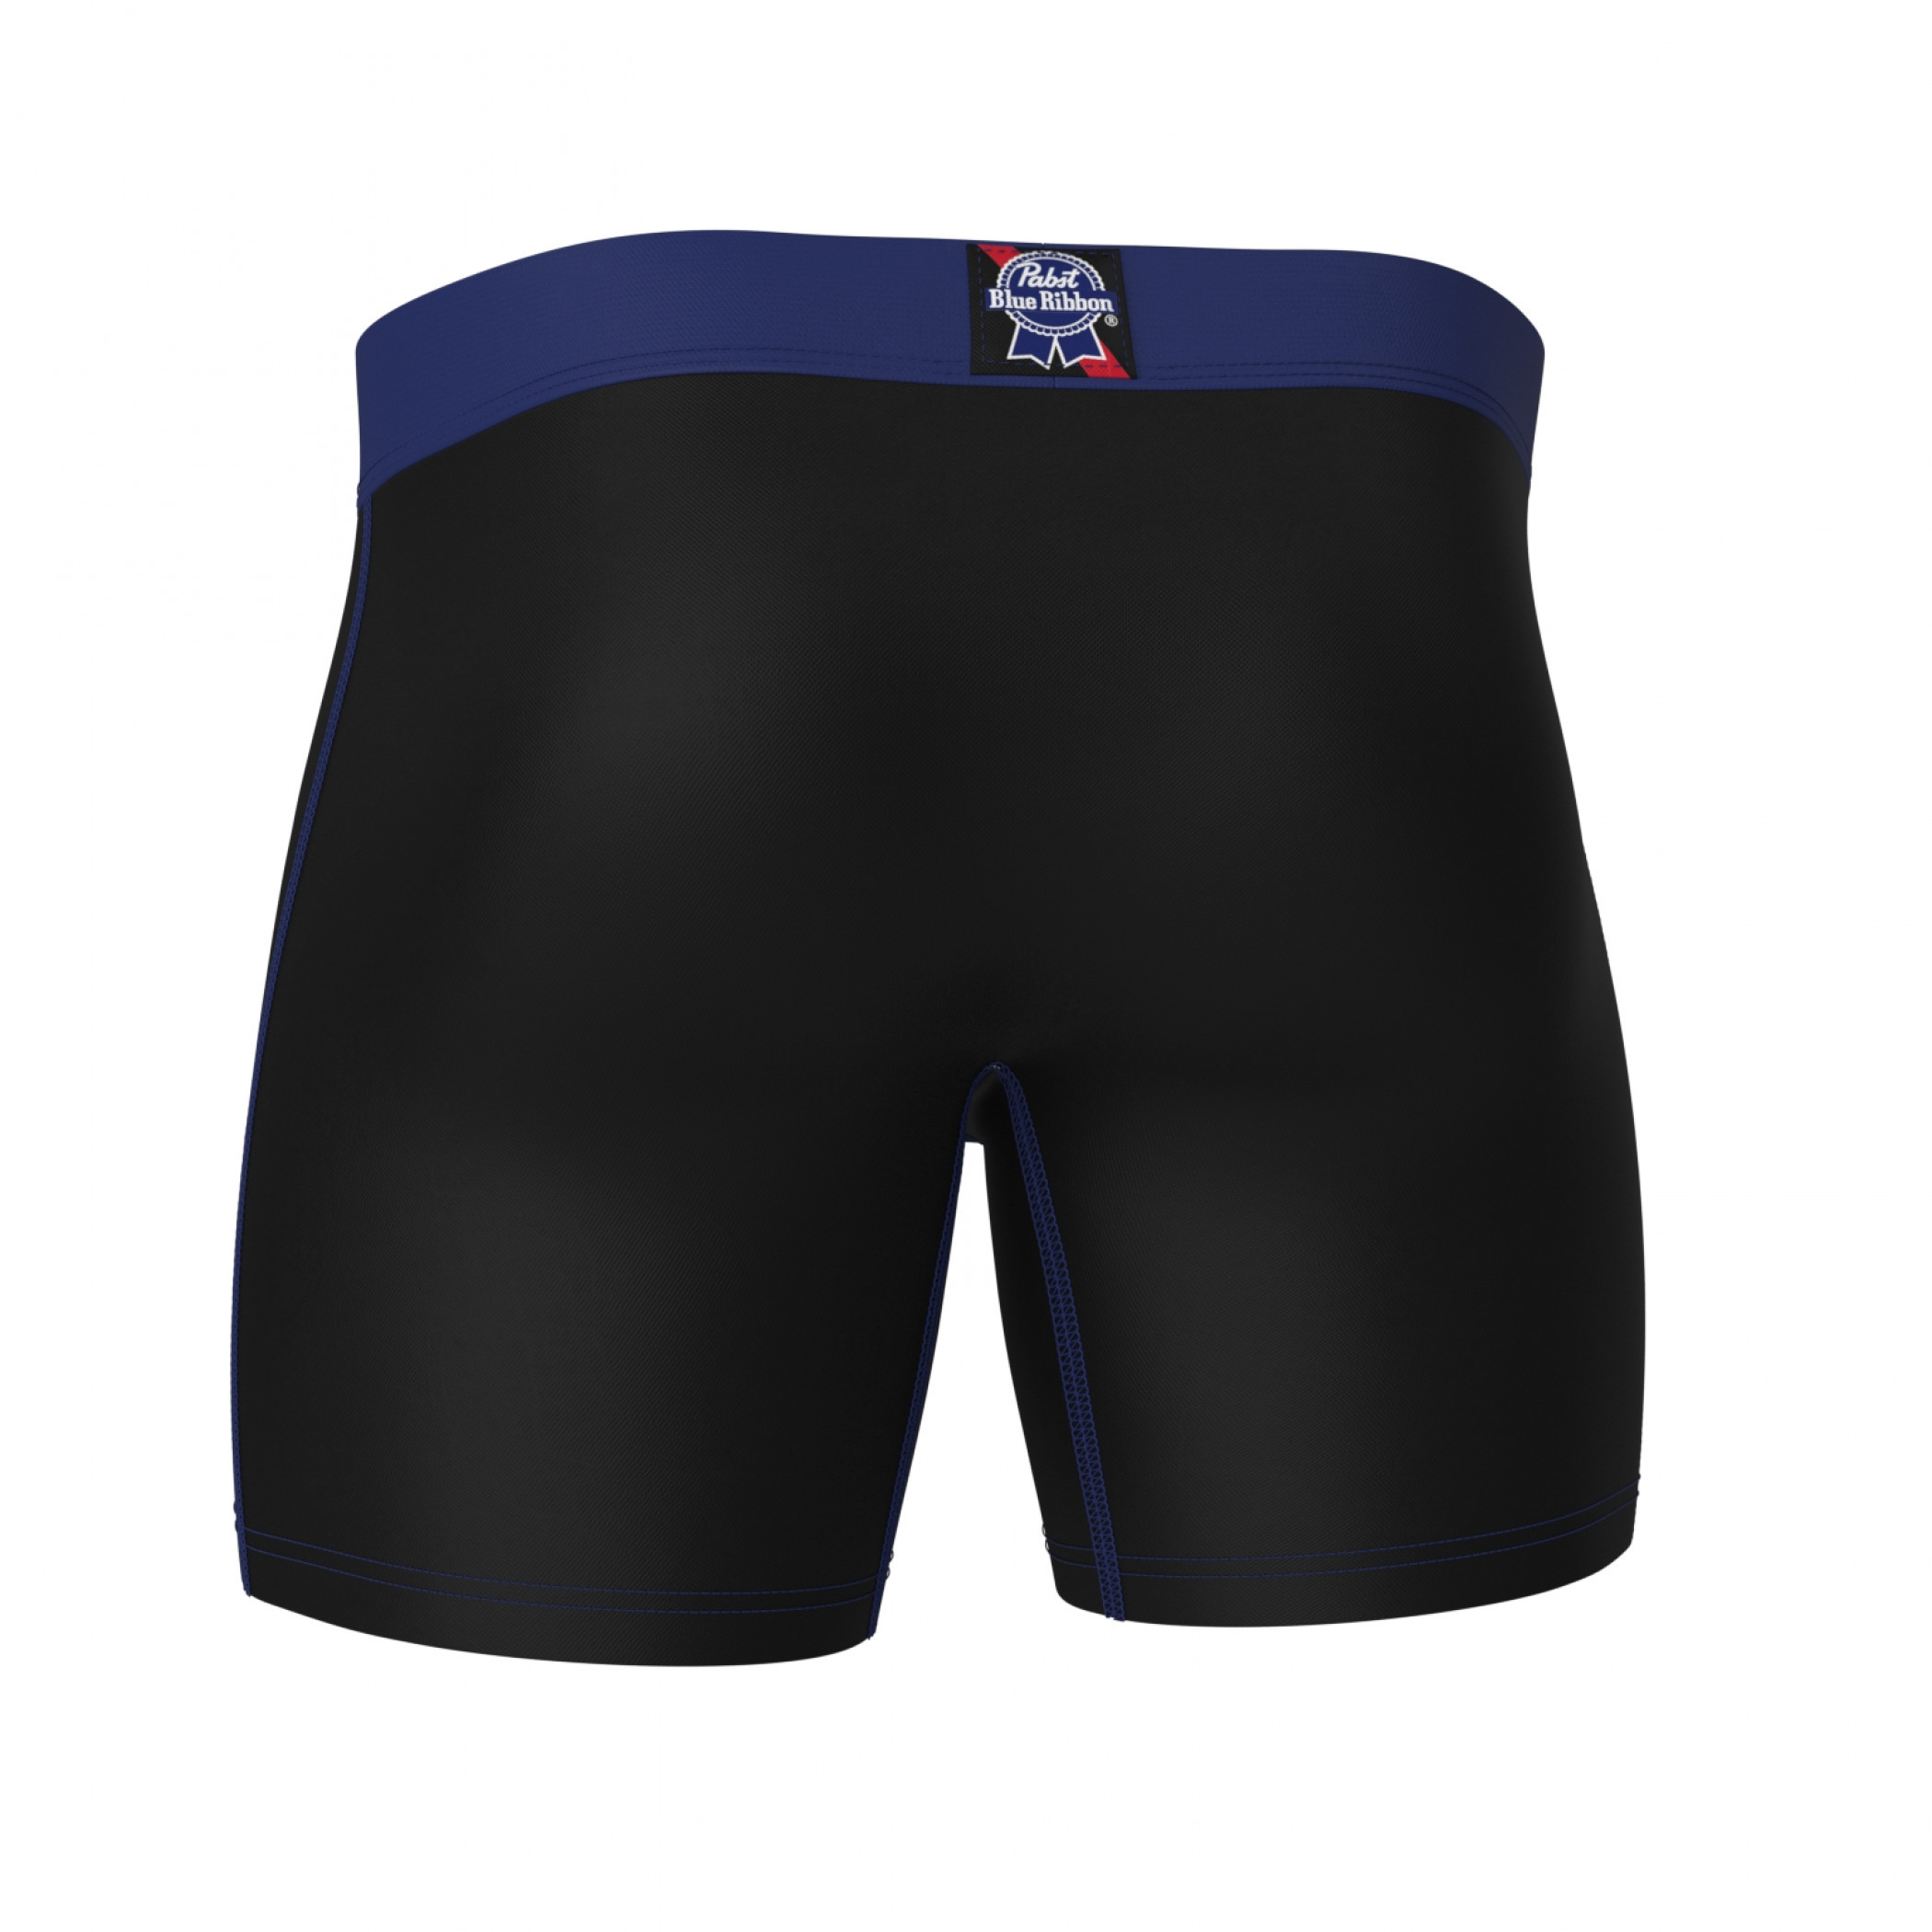 Pabst Blue Ribbon Label Swag Boxer Briefs